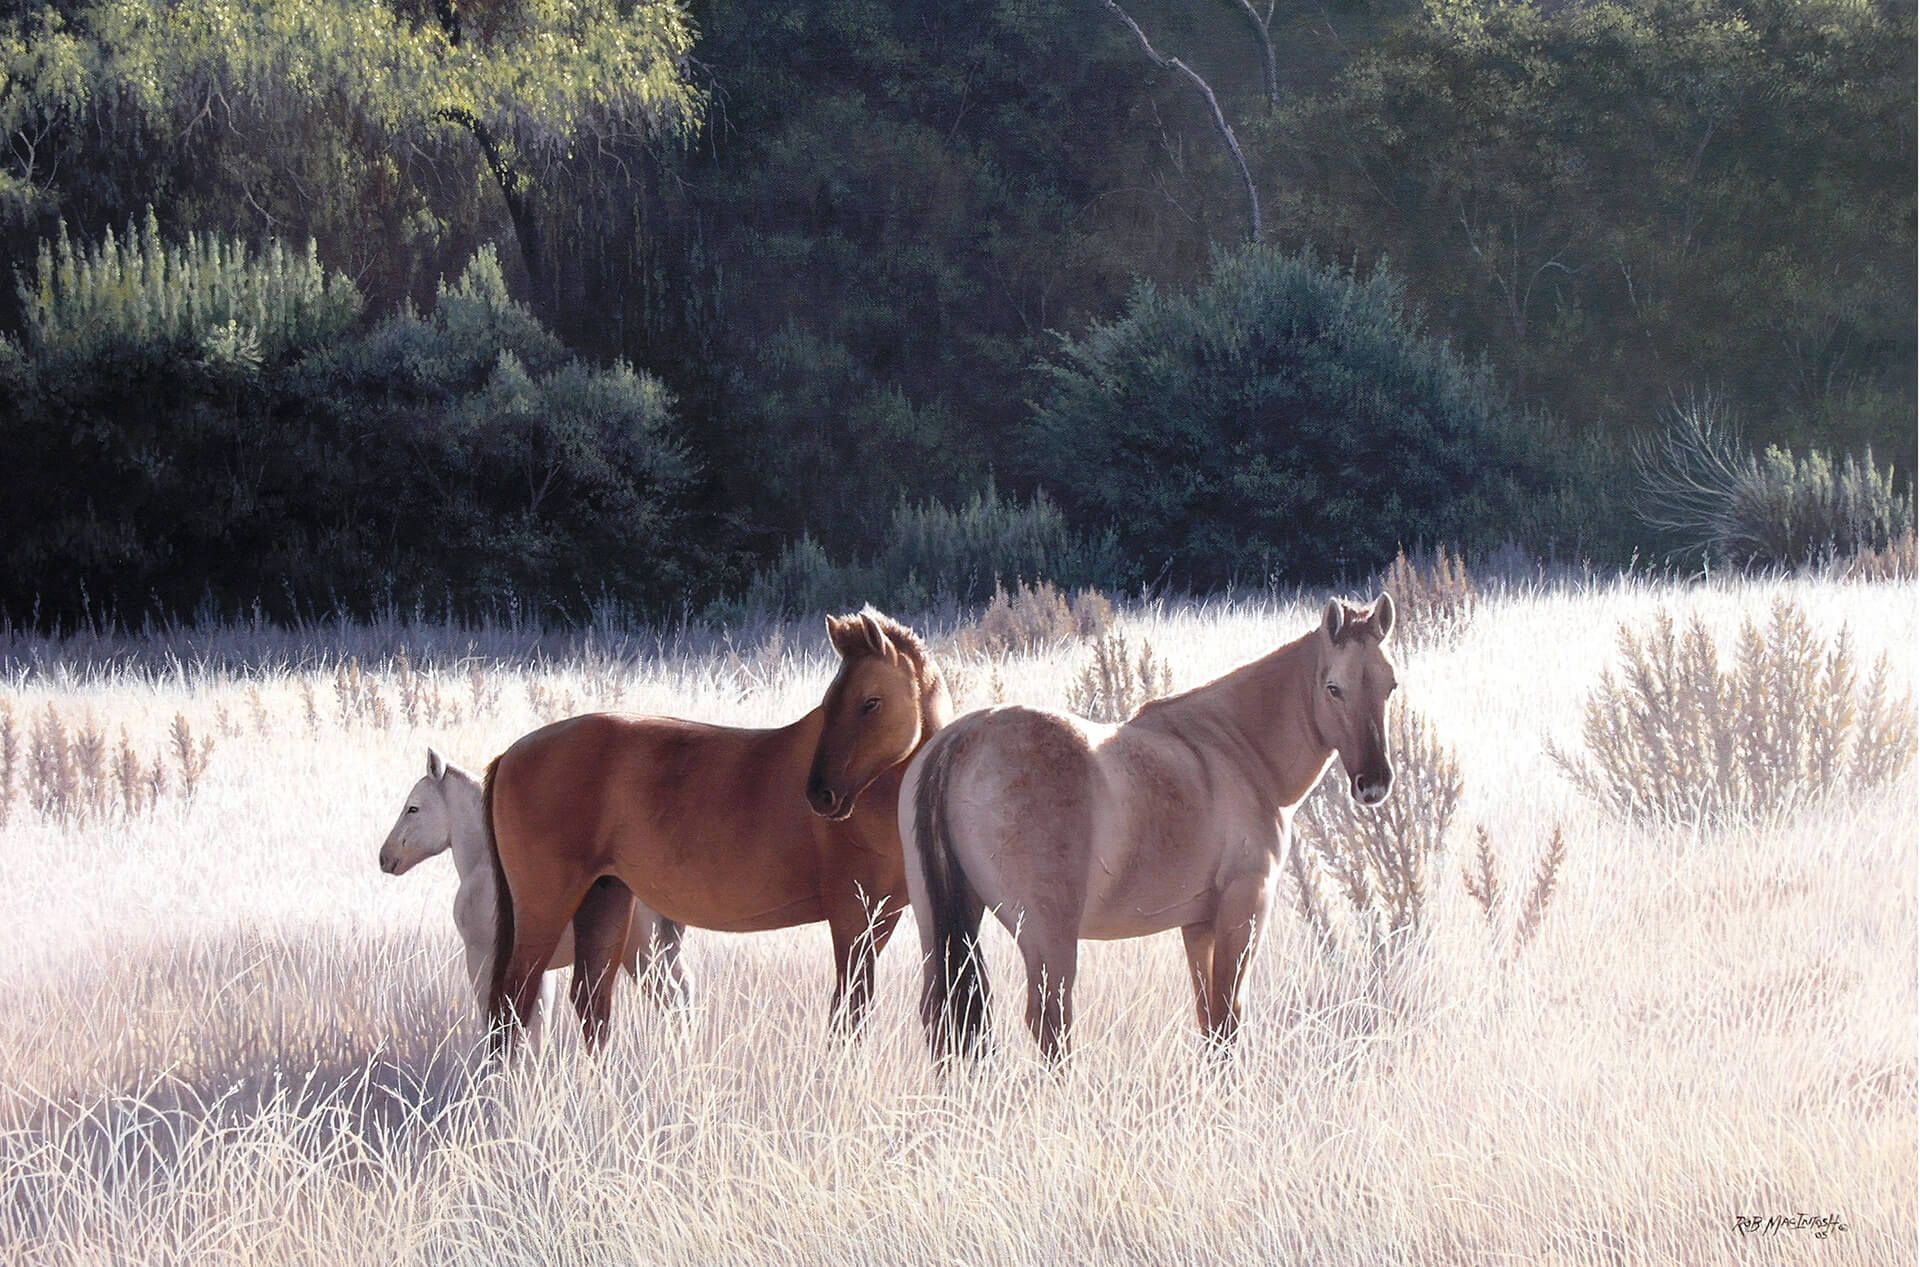 Photorealistic painting of horses standing in a field